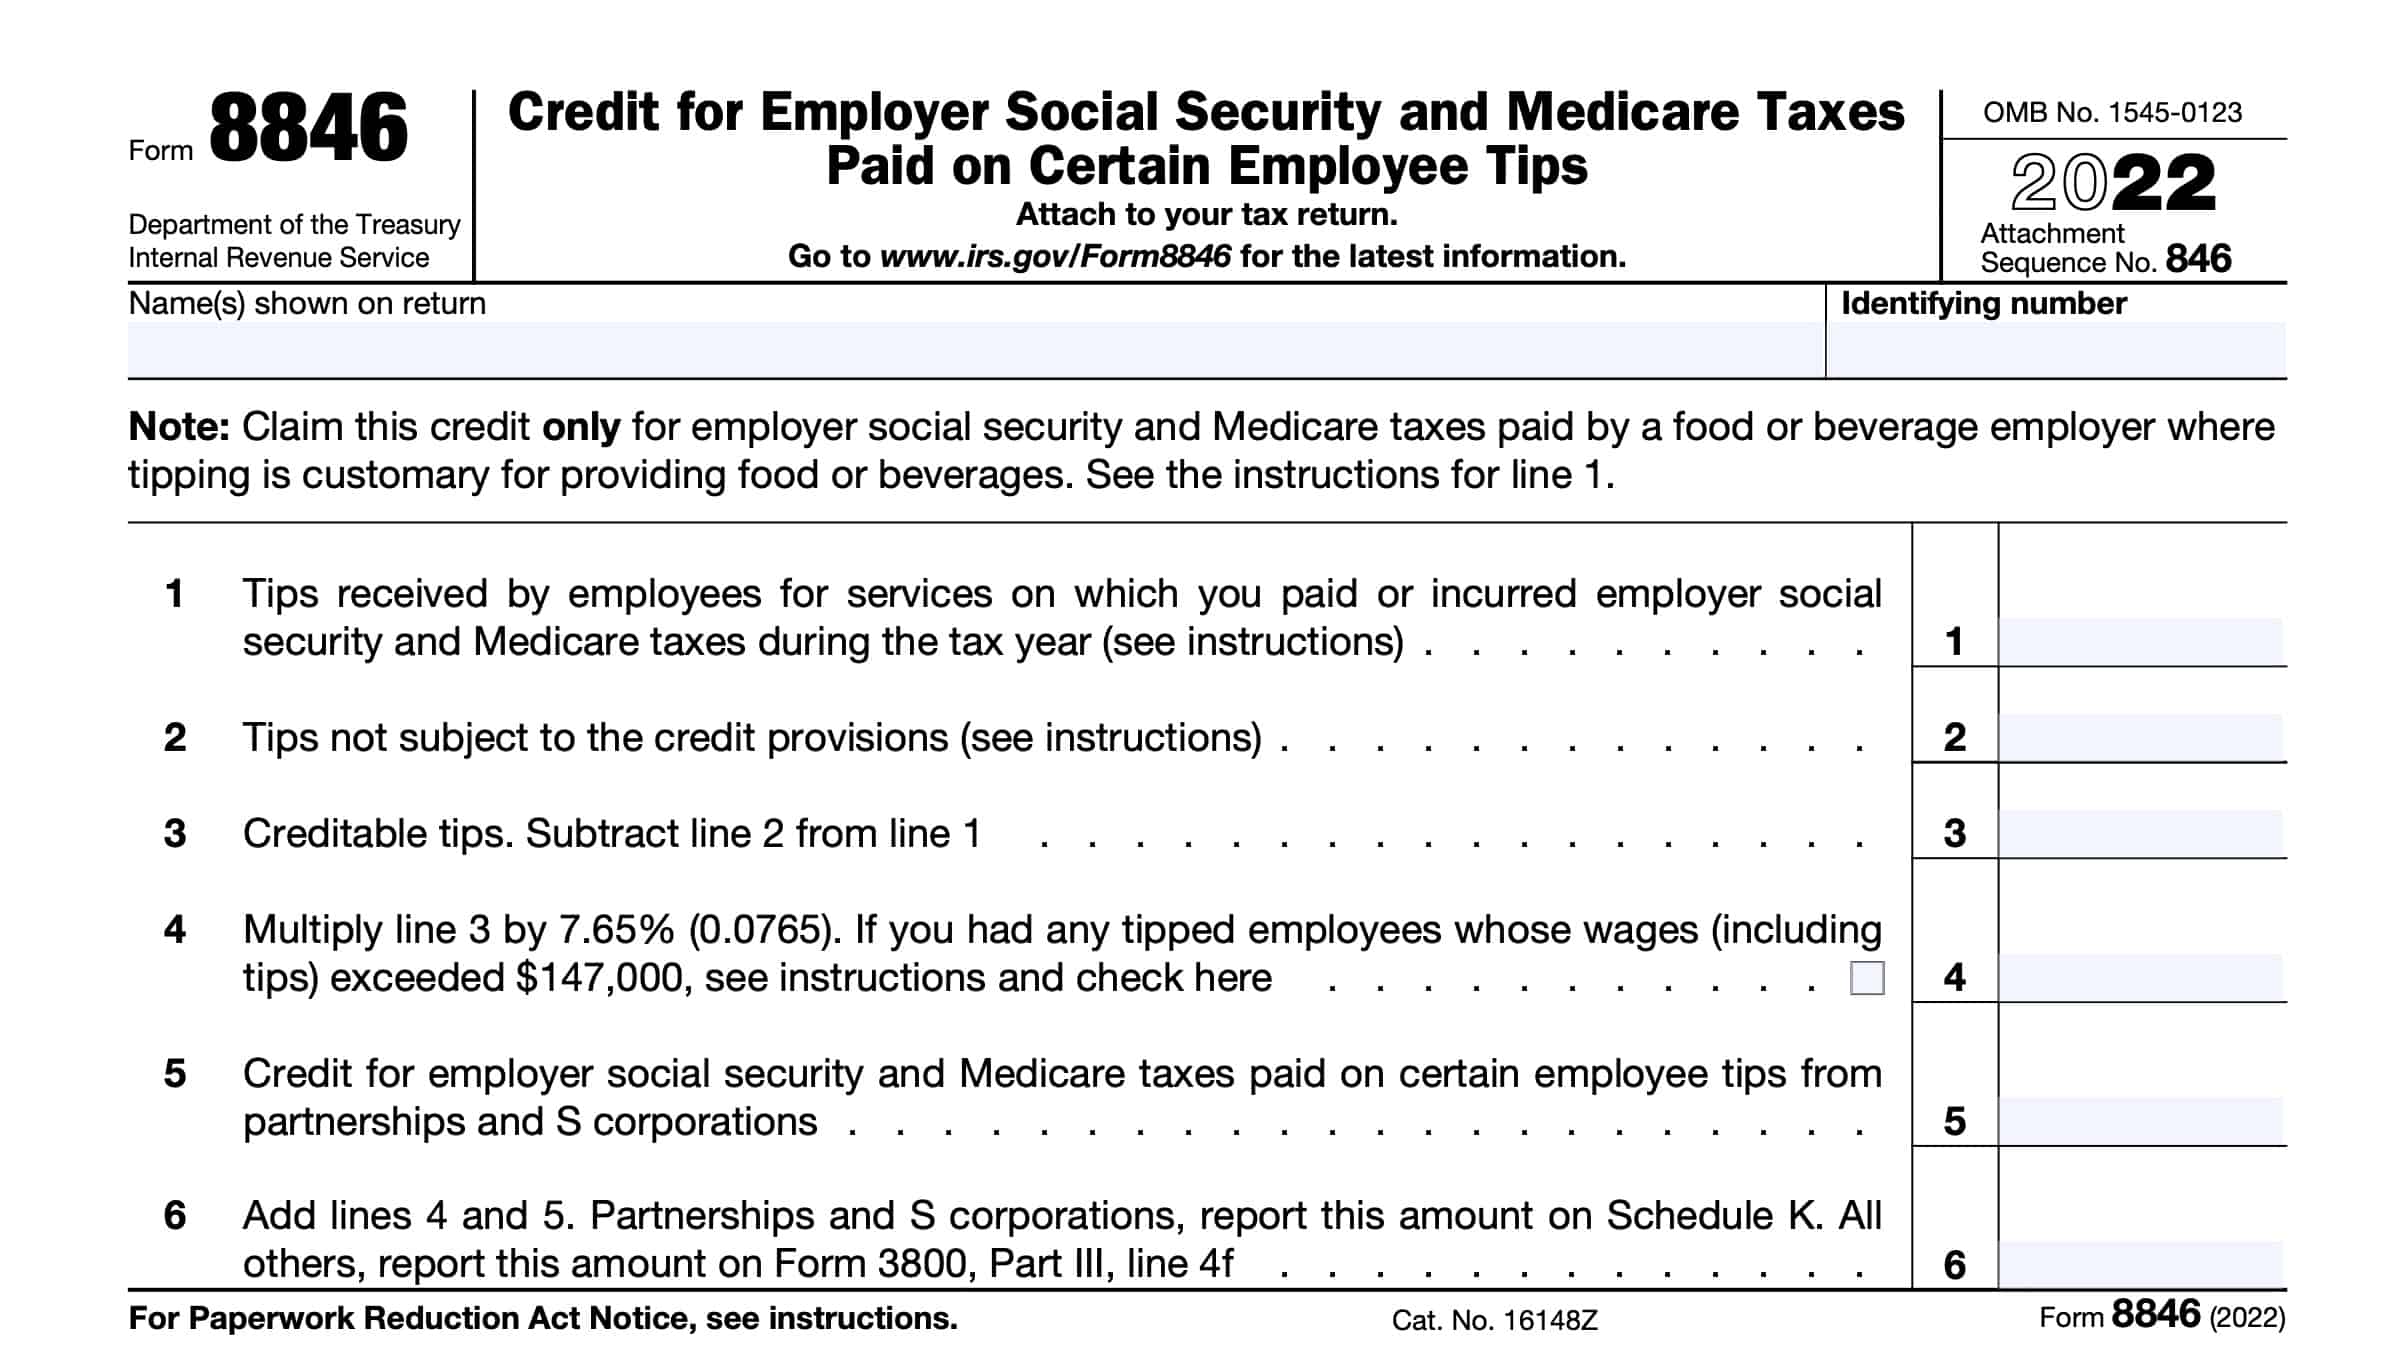 irs form 8846, credit for employer FICA taxes paid on employee tip income